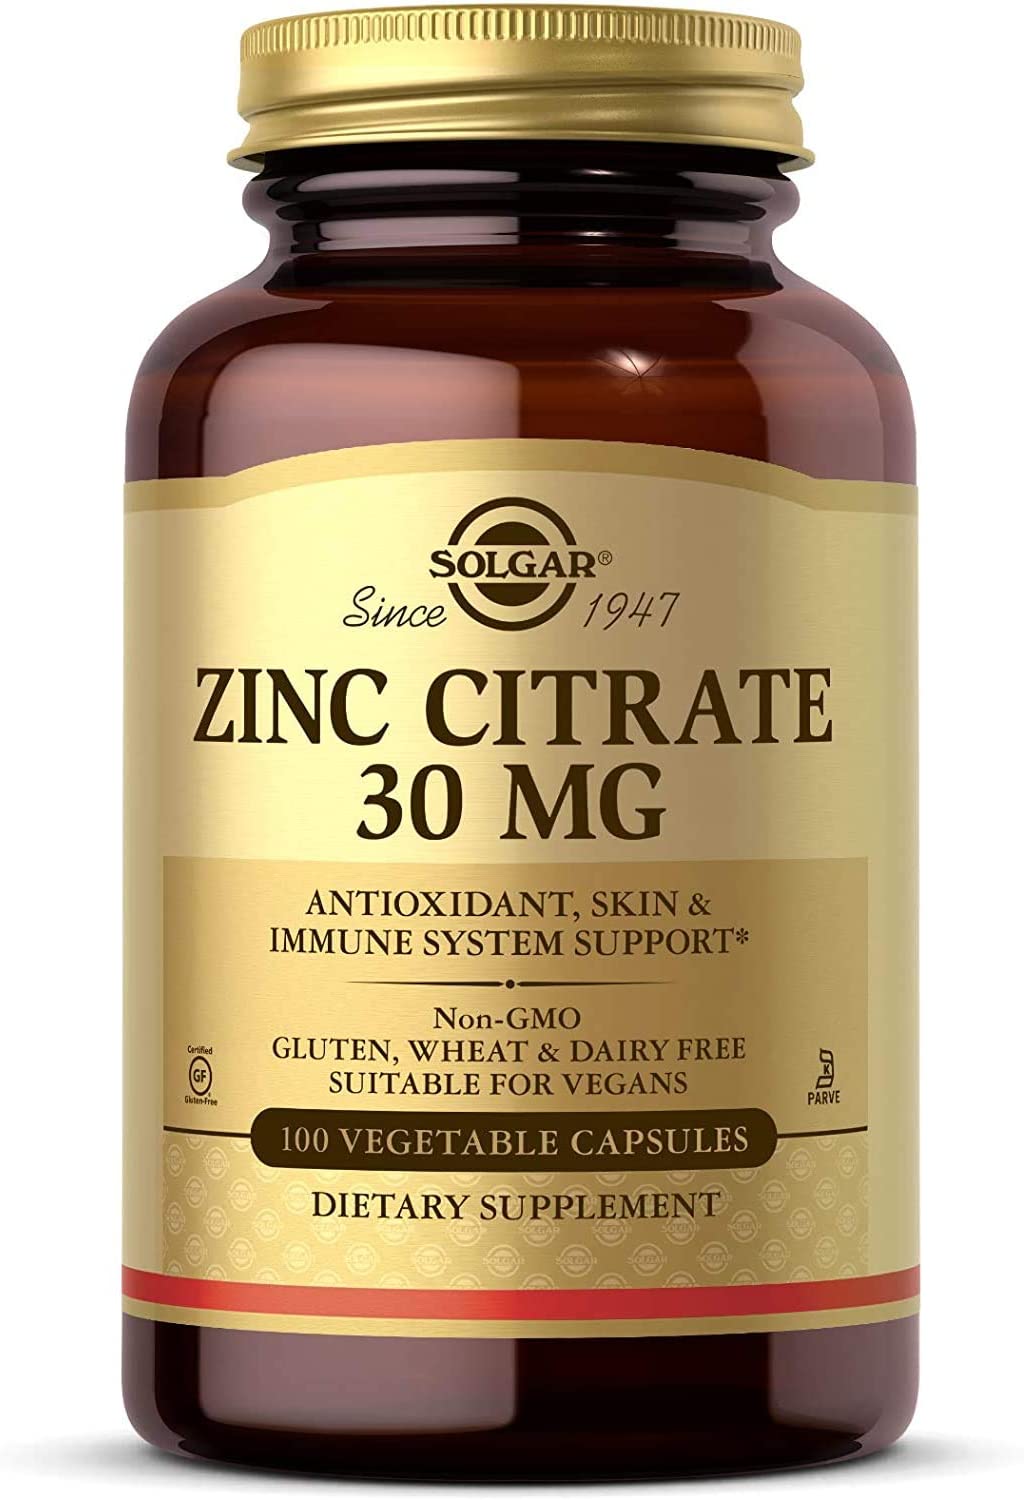 ZINC CITRATE 30 MG VEGETABLE CAPSULES